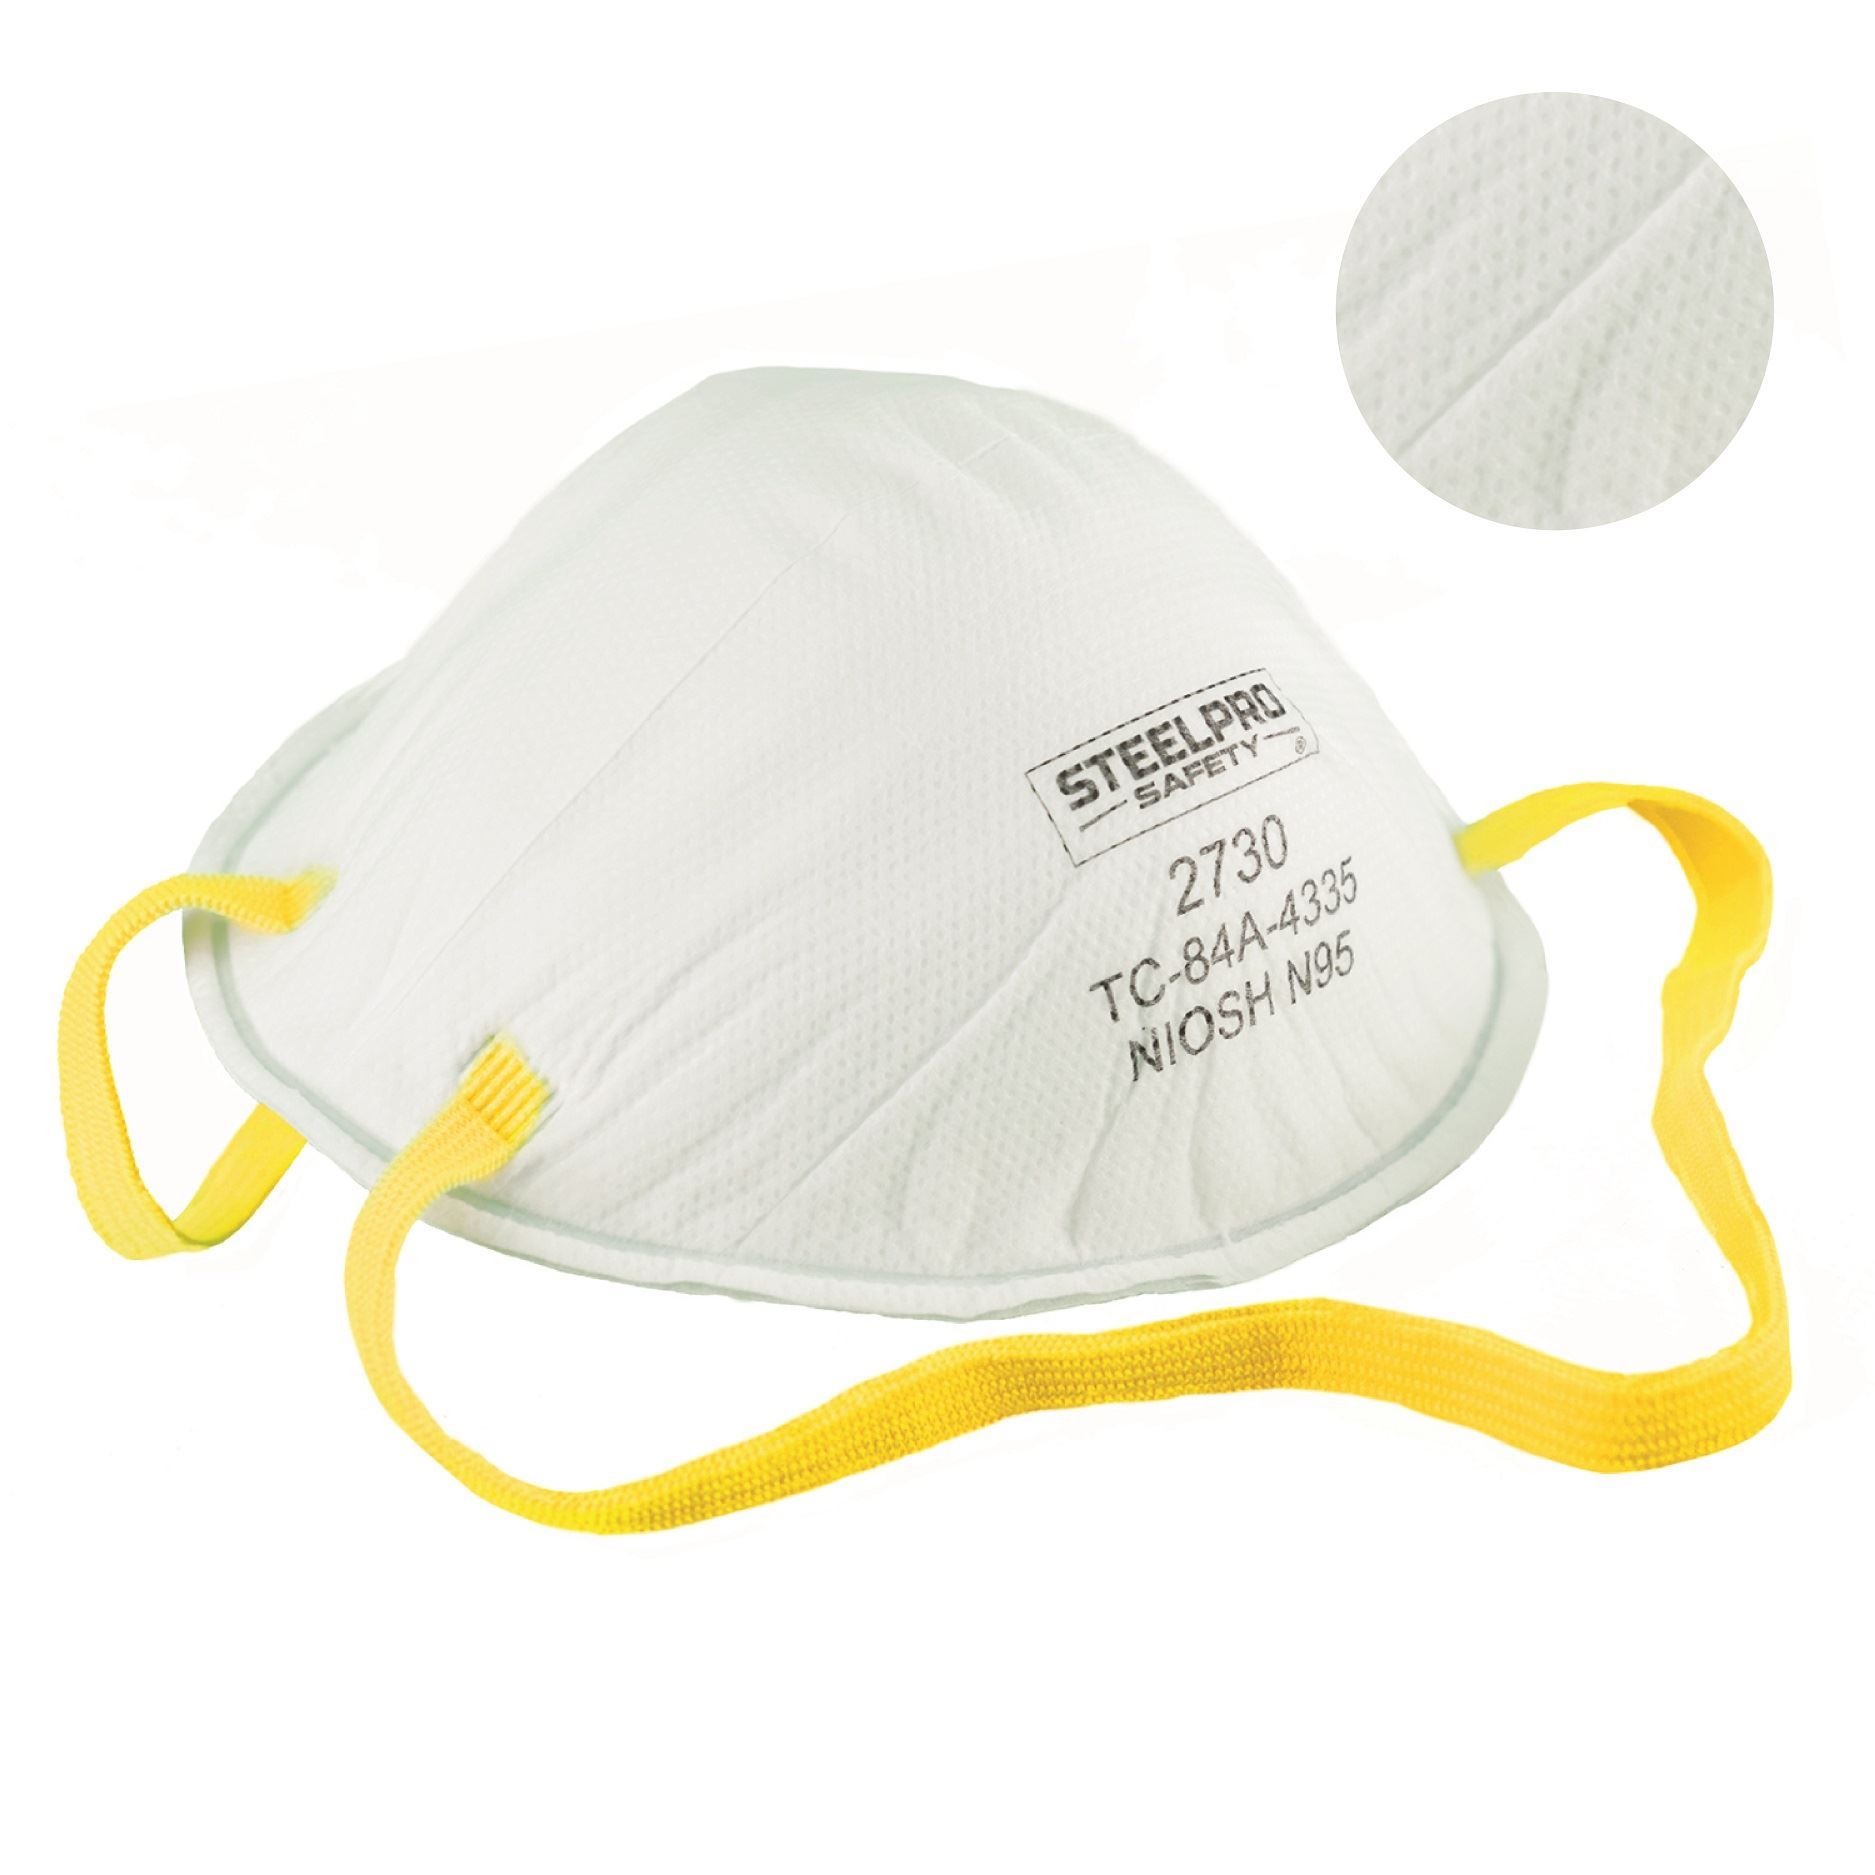 Picture of SteelPro 2730 N95 NIOSH Approved Medical Mask, 20 pieces